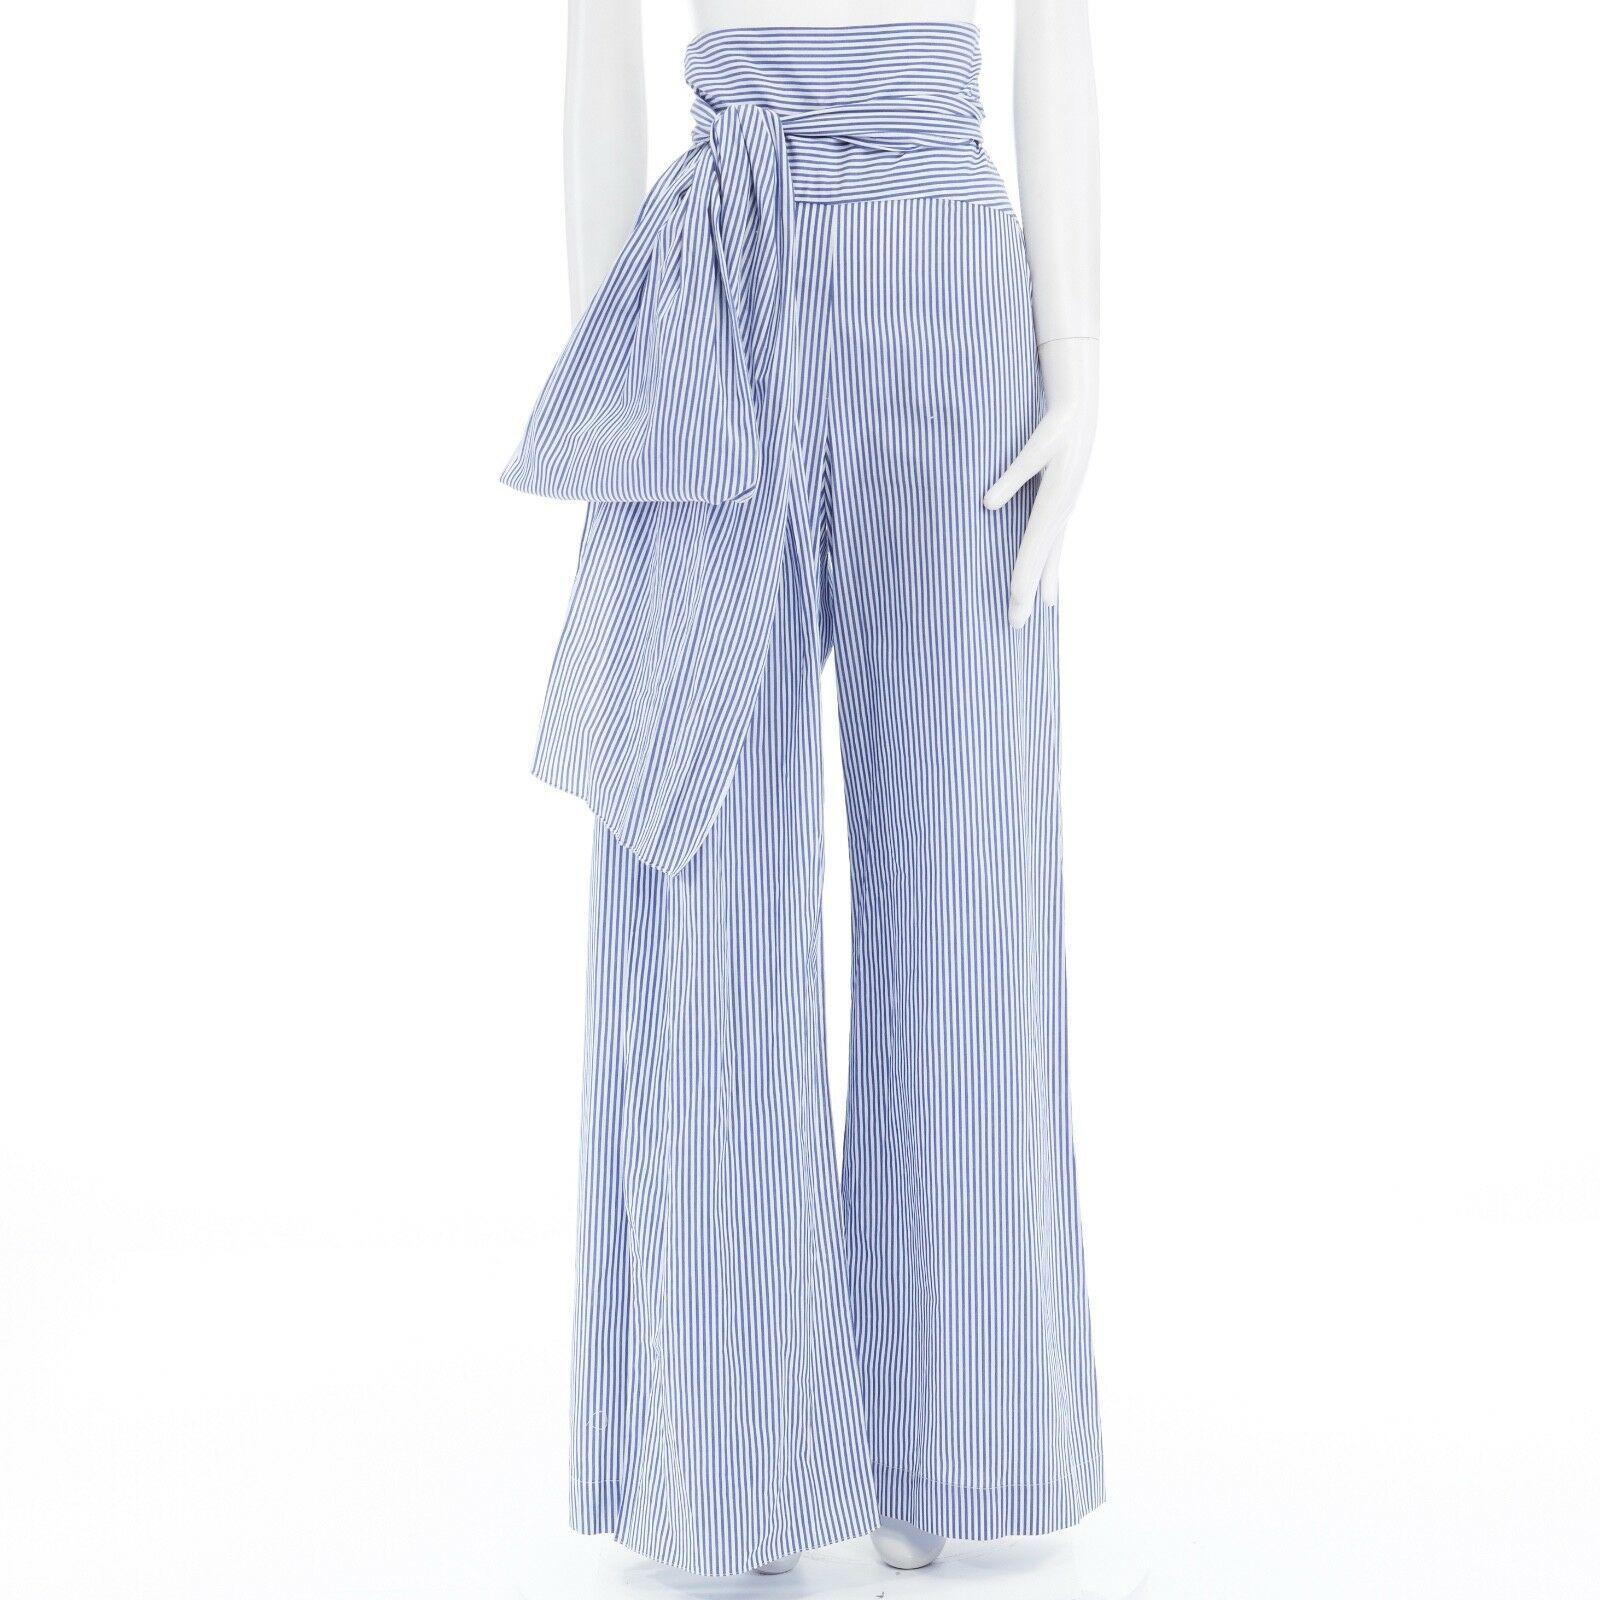 new ROSIE ASSOULIN AW16 blue white pinstripe cotton highwaist sash wide pant US6
ROSIE ASSOULIN
FROM THE FALL WINTER 2016 COLLECTION
Cotton . 
Blue and white shirting cototn . 
High waisted . 
Concealed zip side closure .
Attached self tie sash